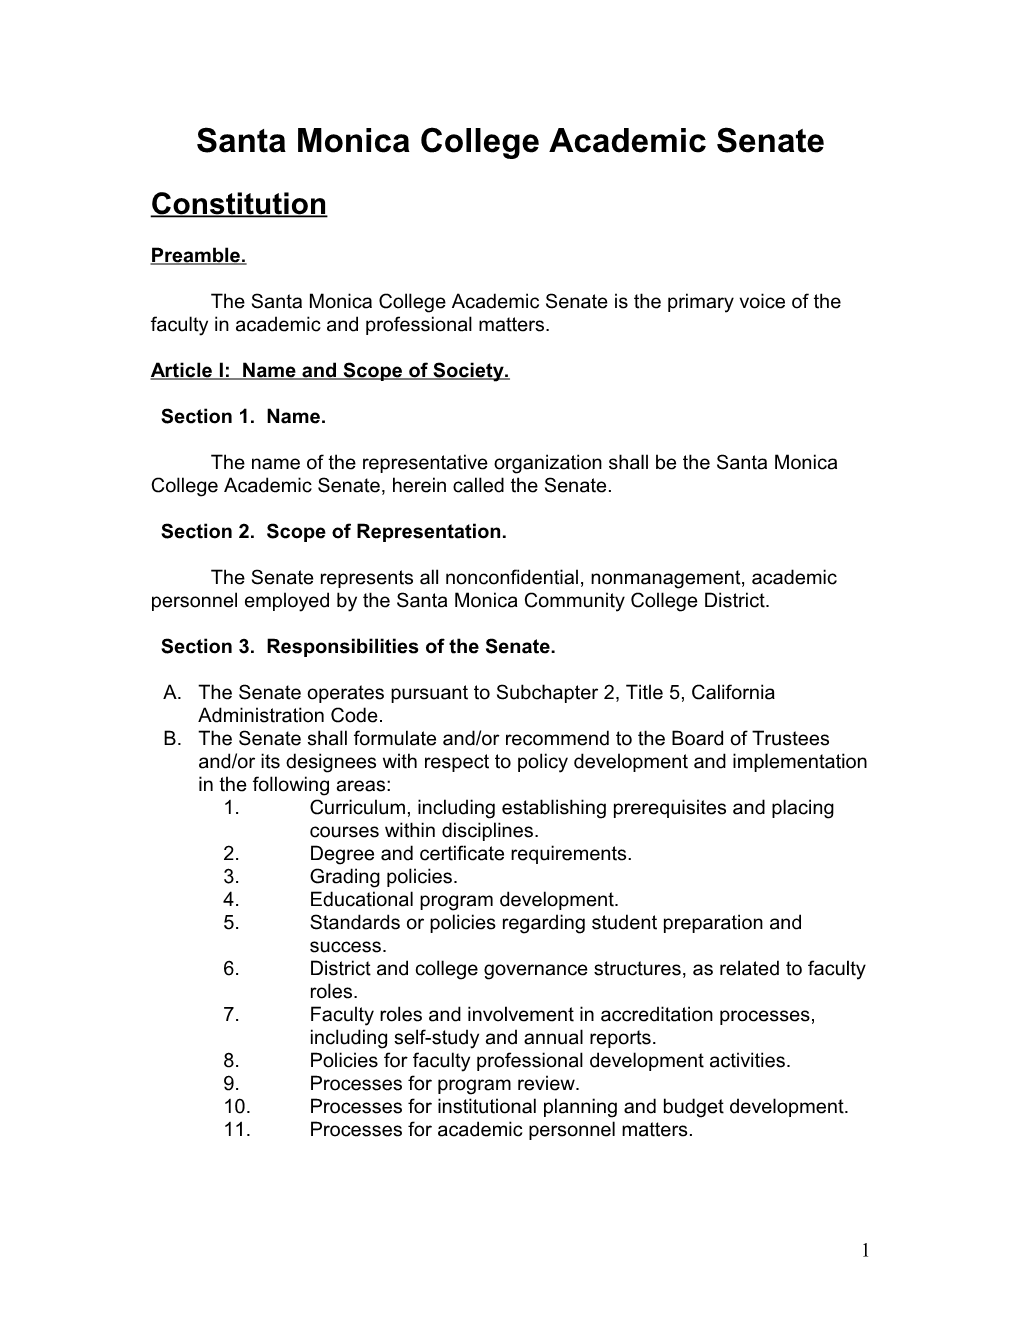 Election and Rules Constitution